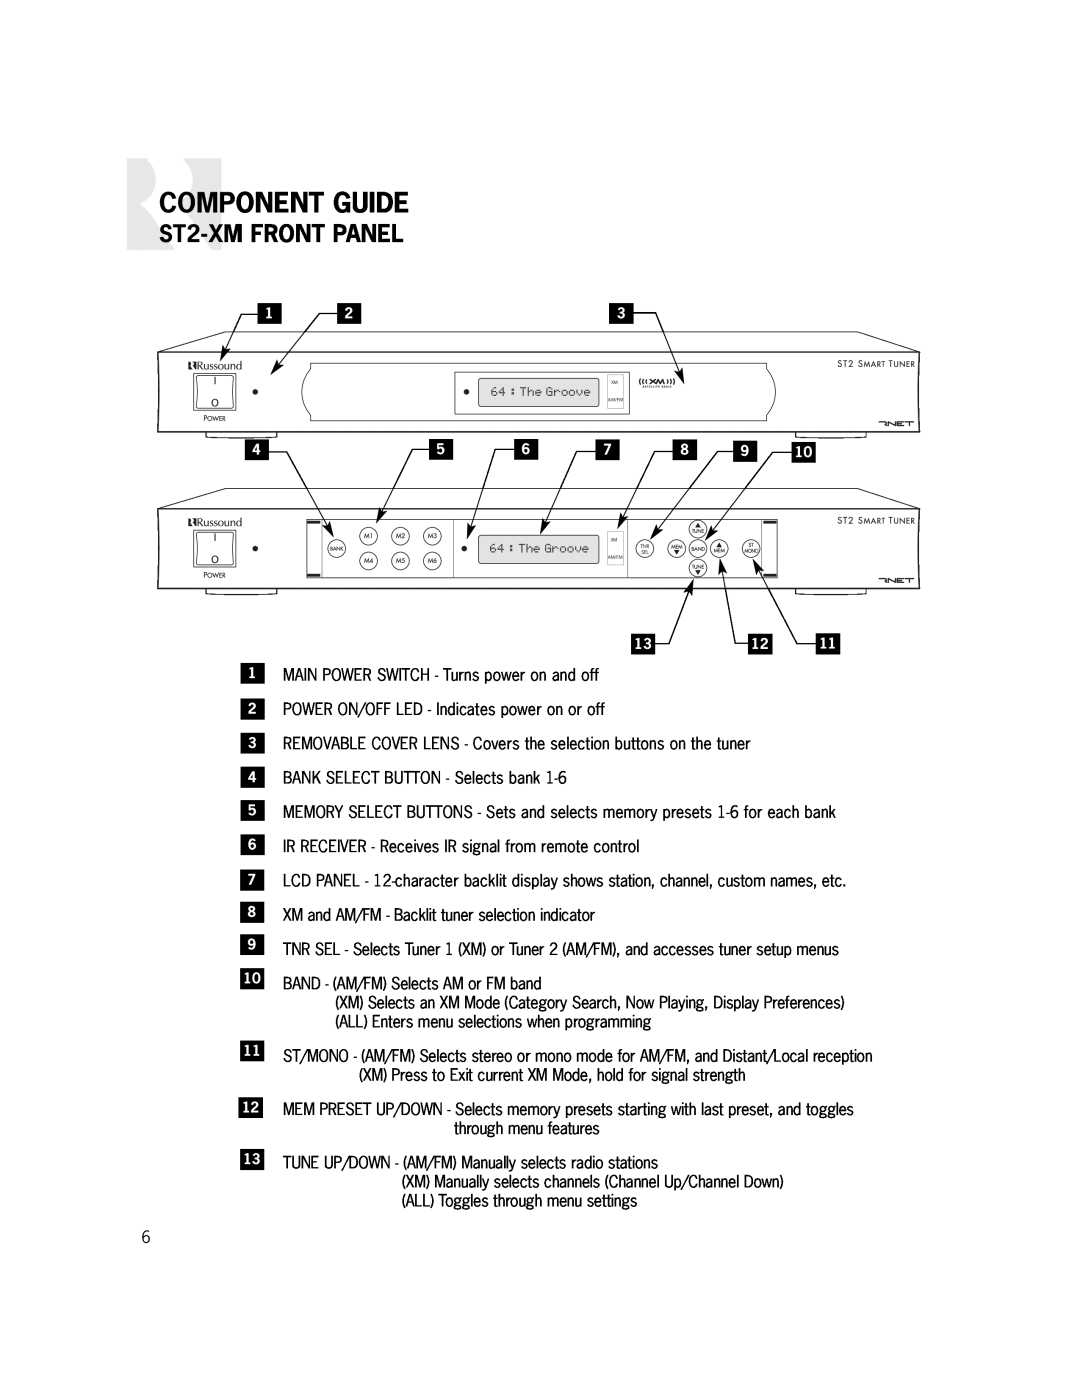 Russound manual Component Guide, ST2-XMFRONT PANEL 